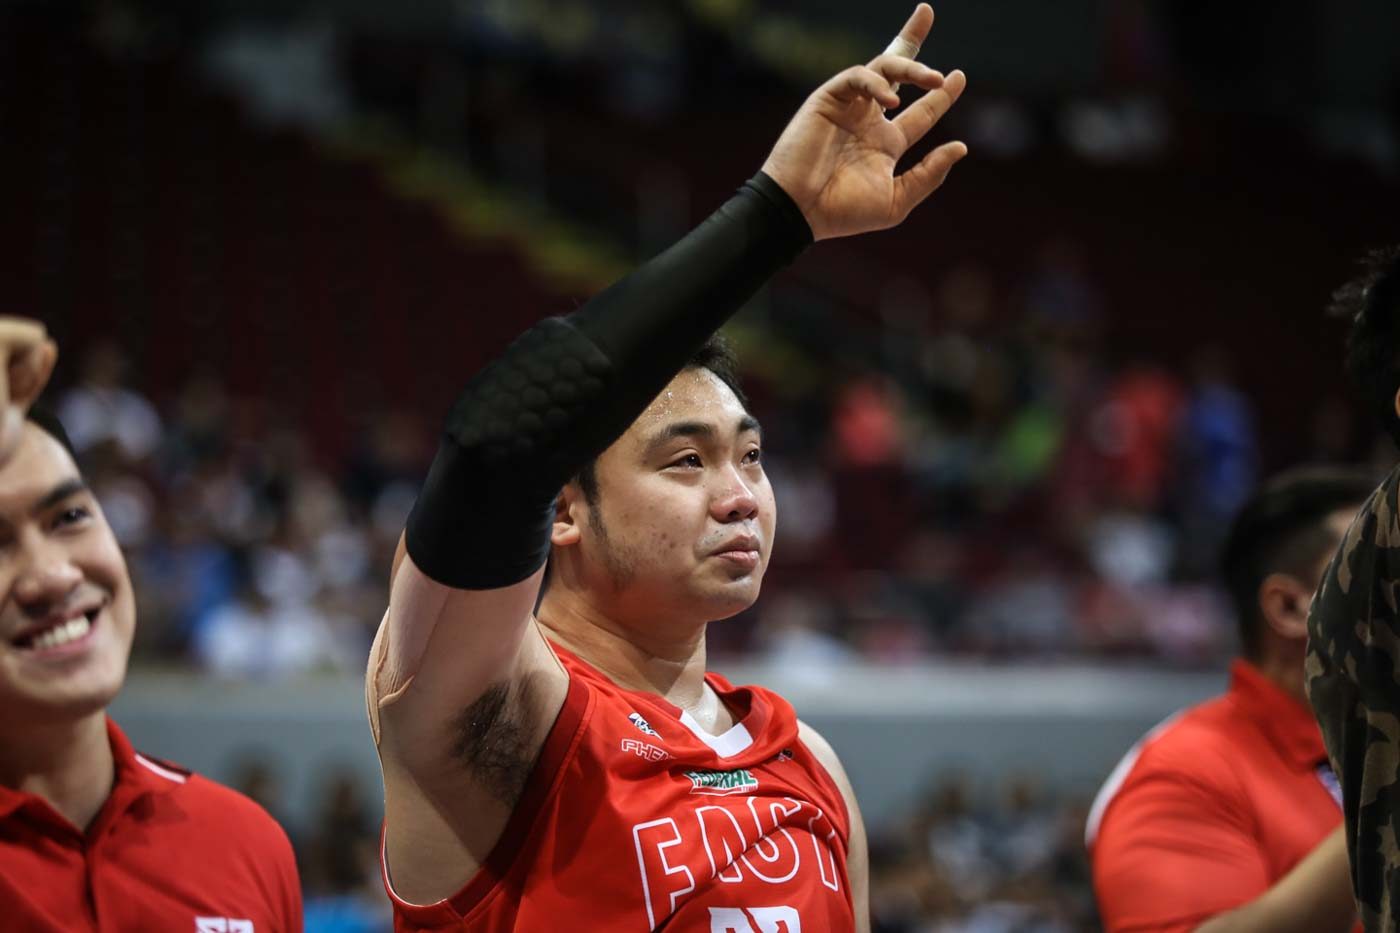 Alvin Pasaol a ‘1st-round pick’ in PBA draft, says UE coach